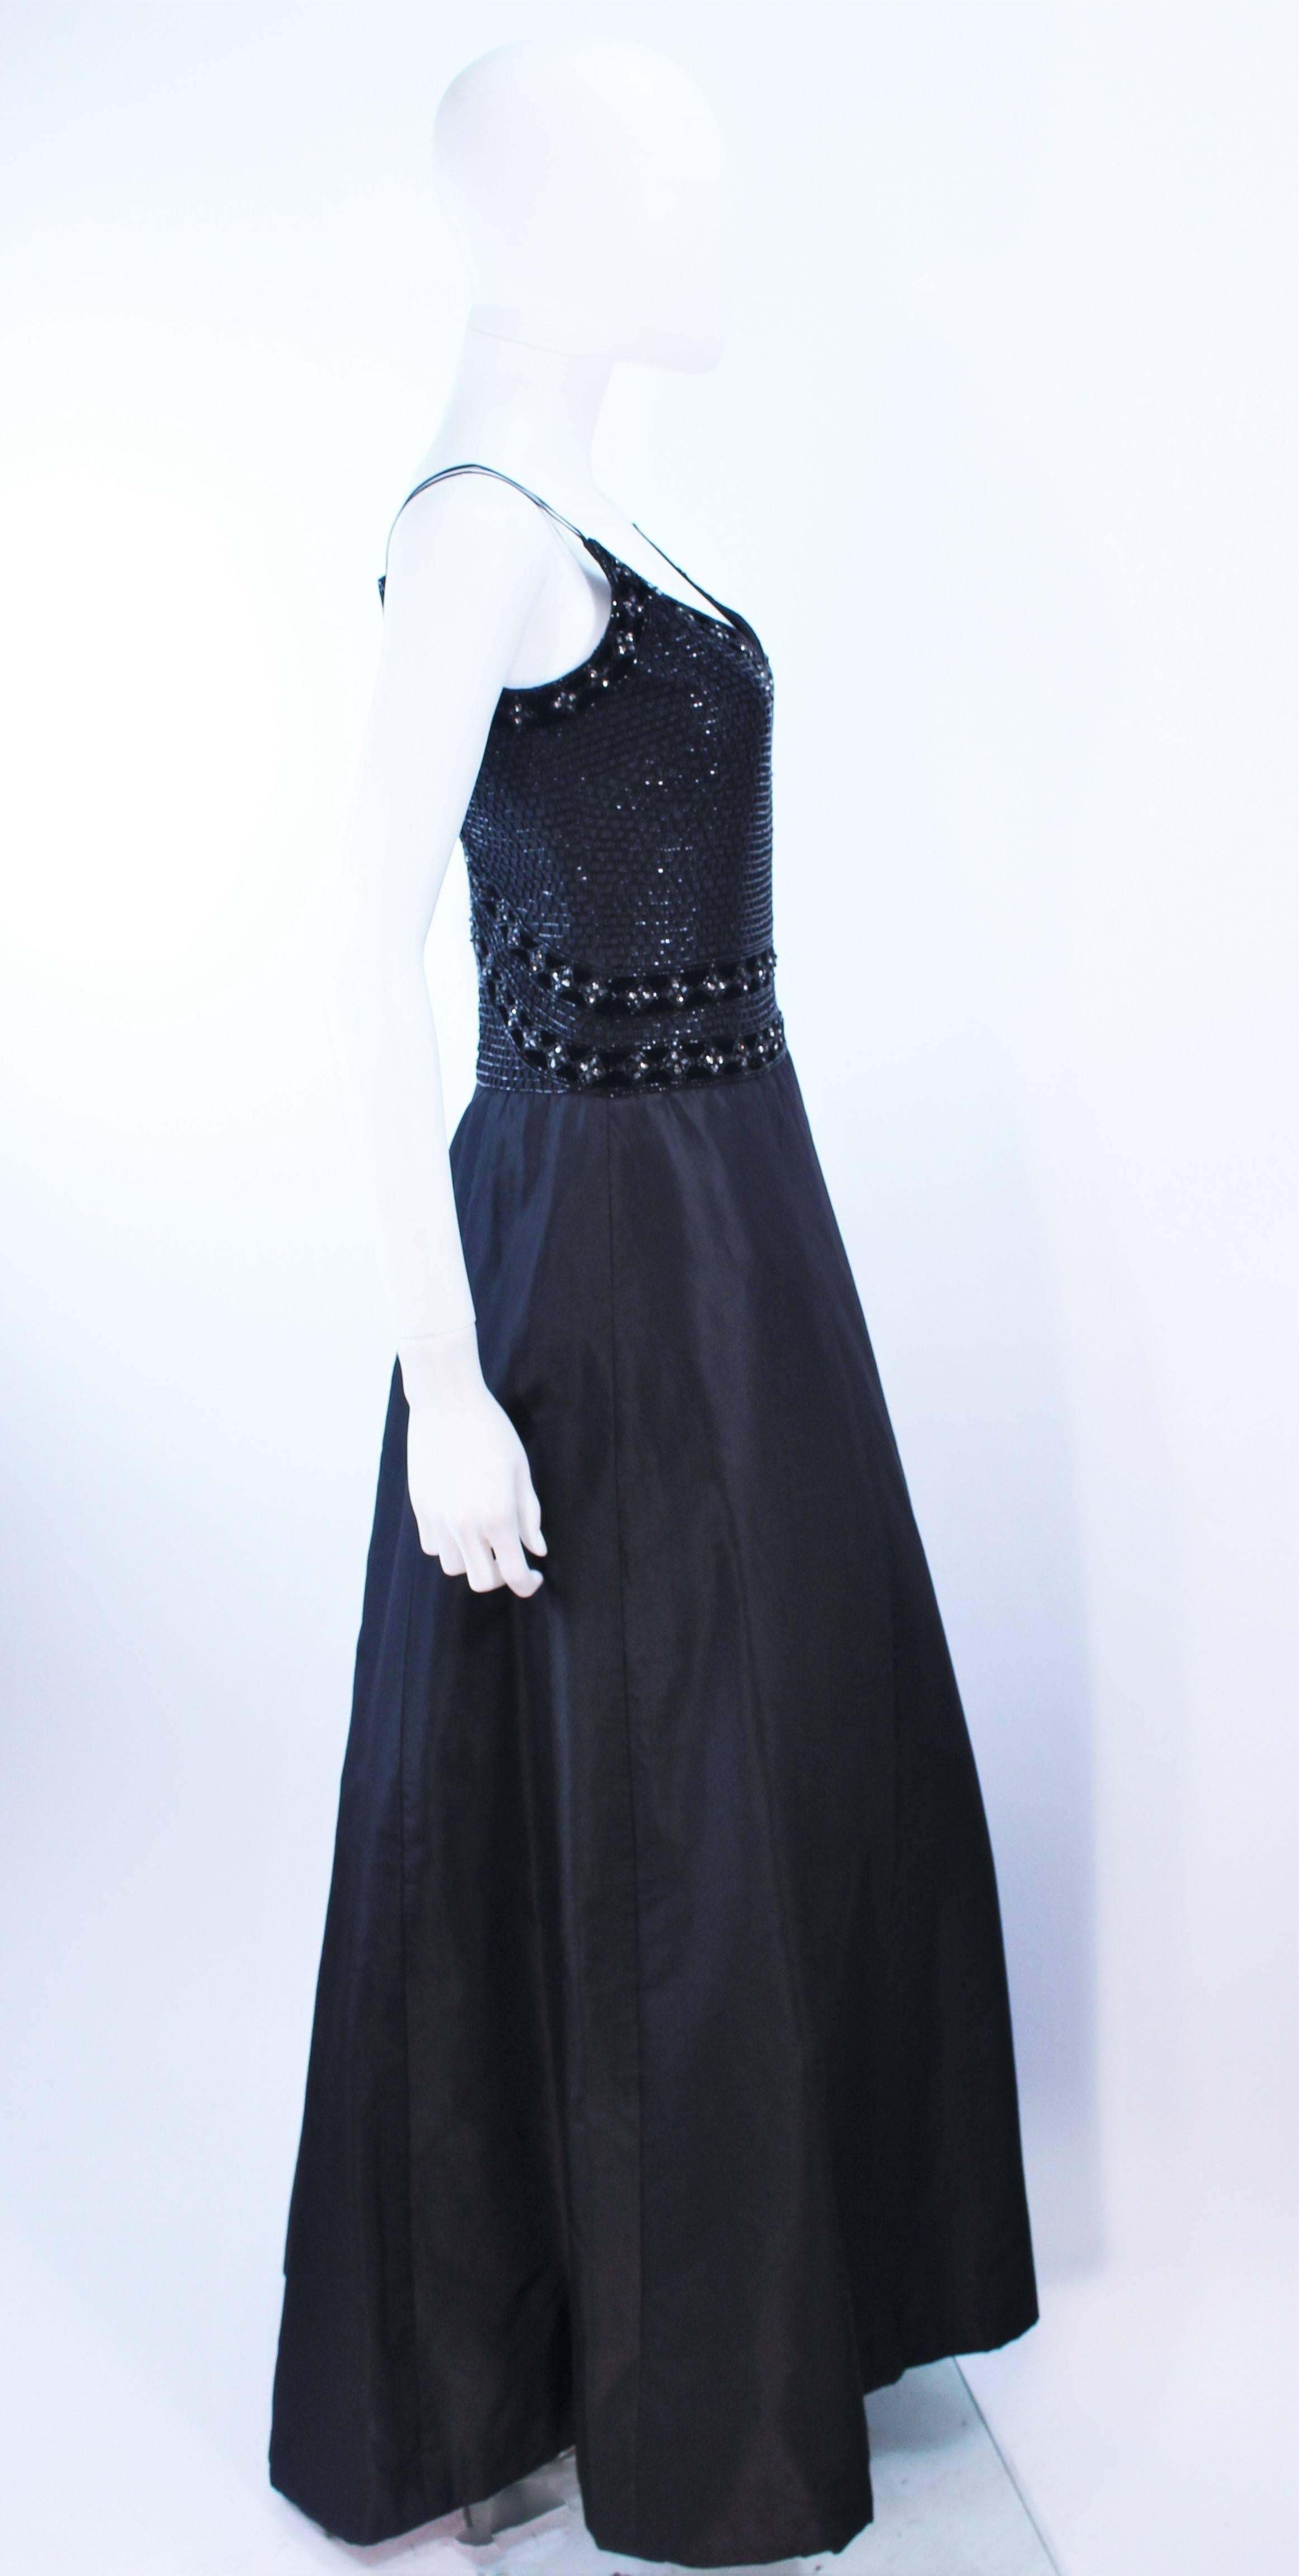 BADLEY MISCHKA Black Satin Beaded Gown with Rhinestone Accents Size 4  For Sale 1